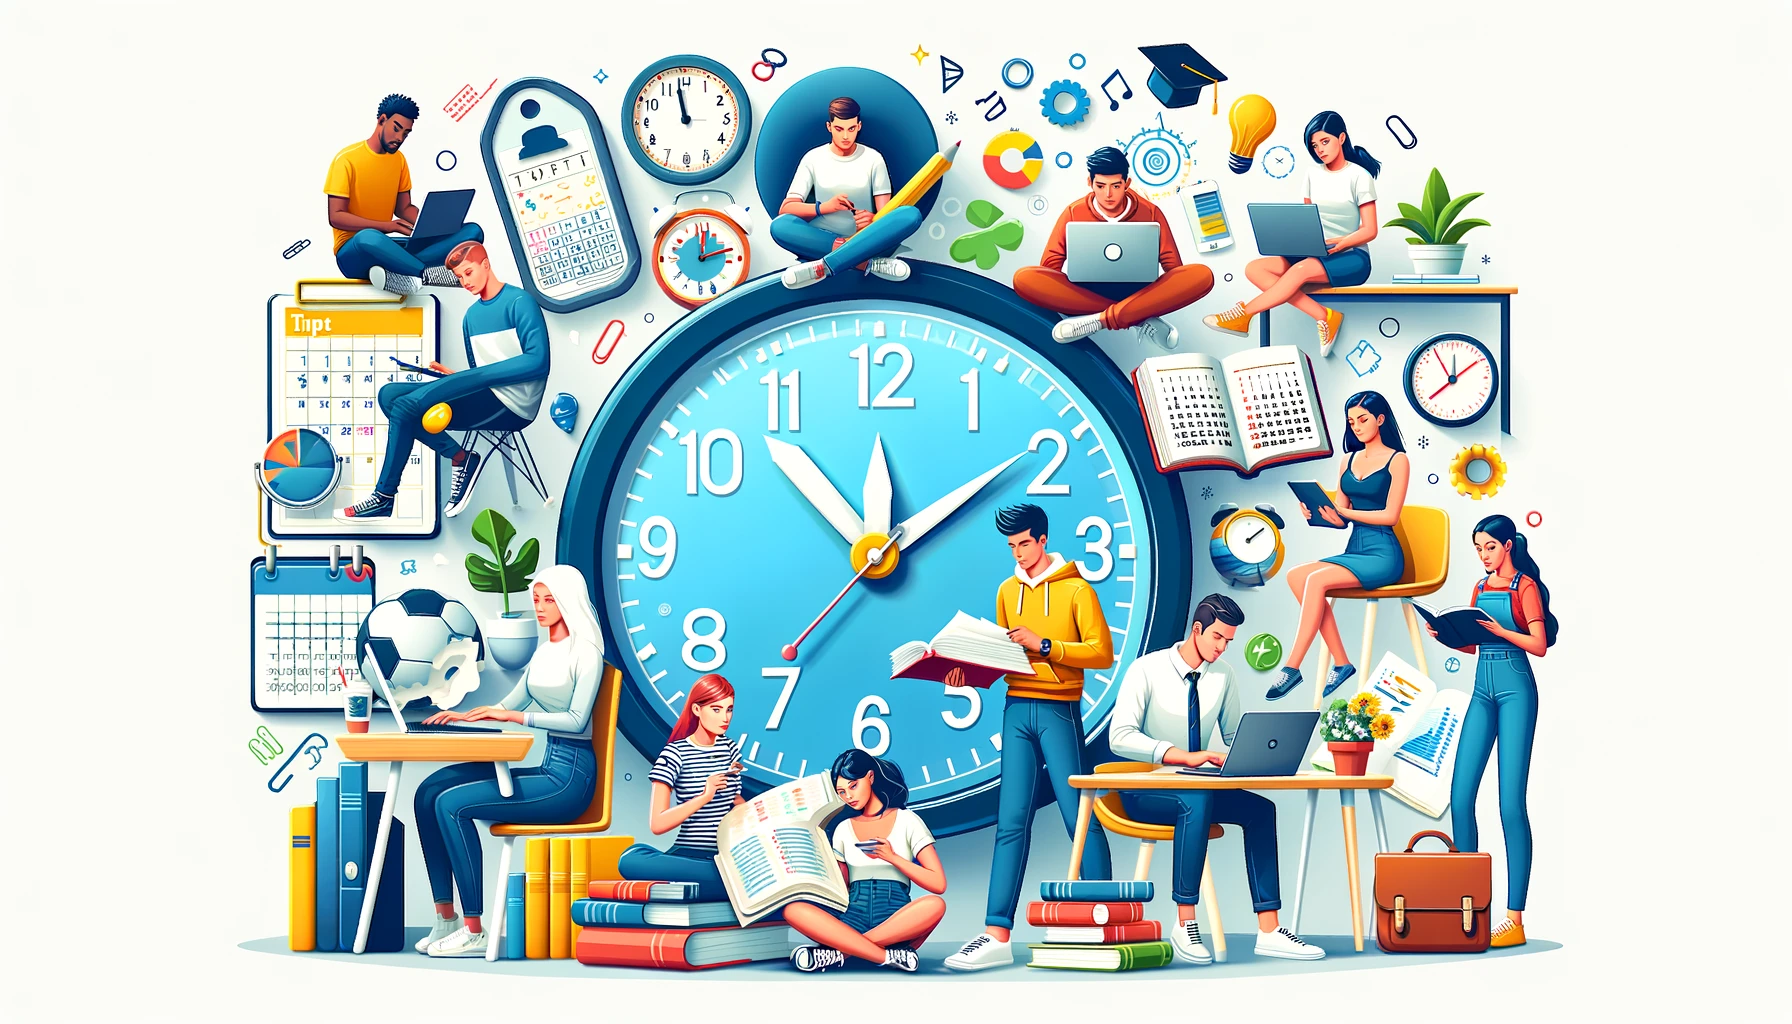 10 Time Management Tips for University Students